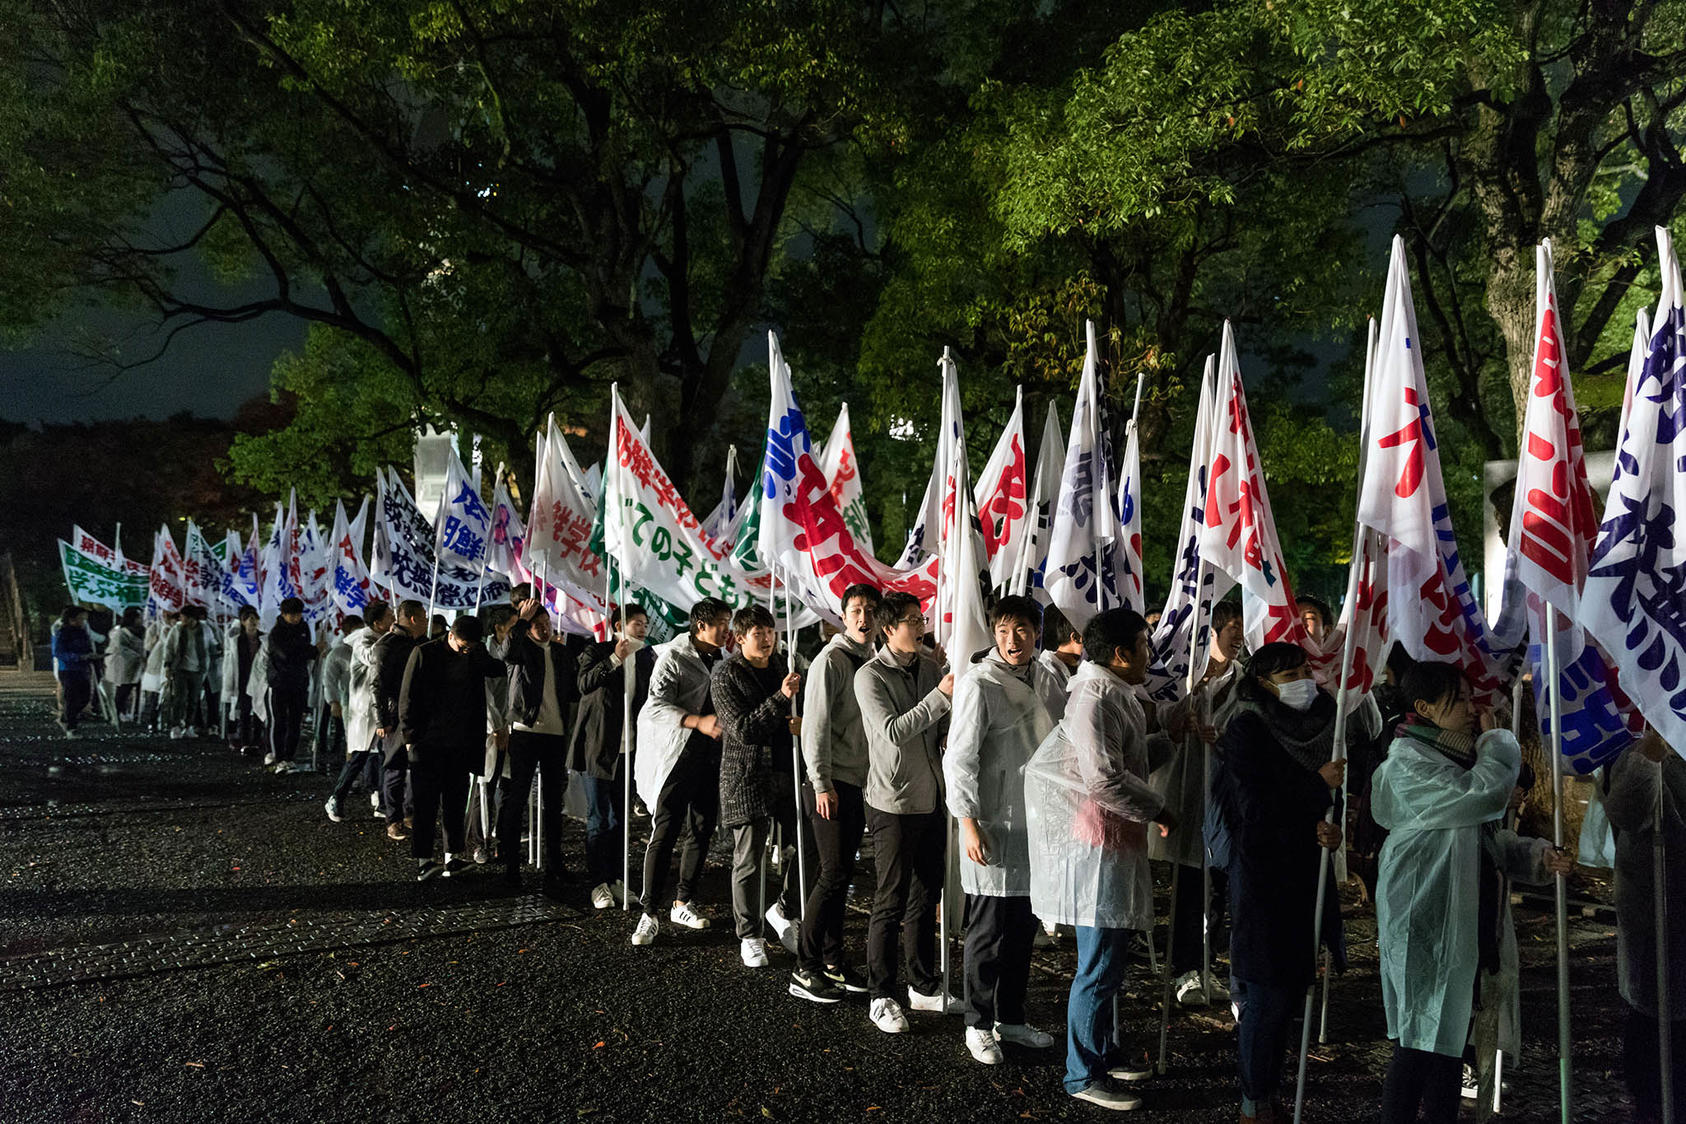 Members of the Korean diaspora protesting the Japanese government’s effort to defund their schools, in Tokyo in October 2017. (Jeremie Souteyrat/The New York Times)